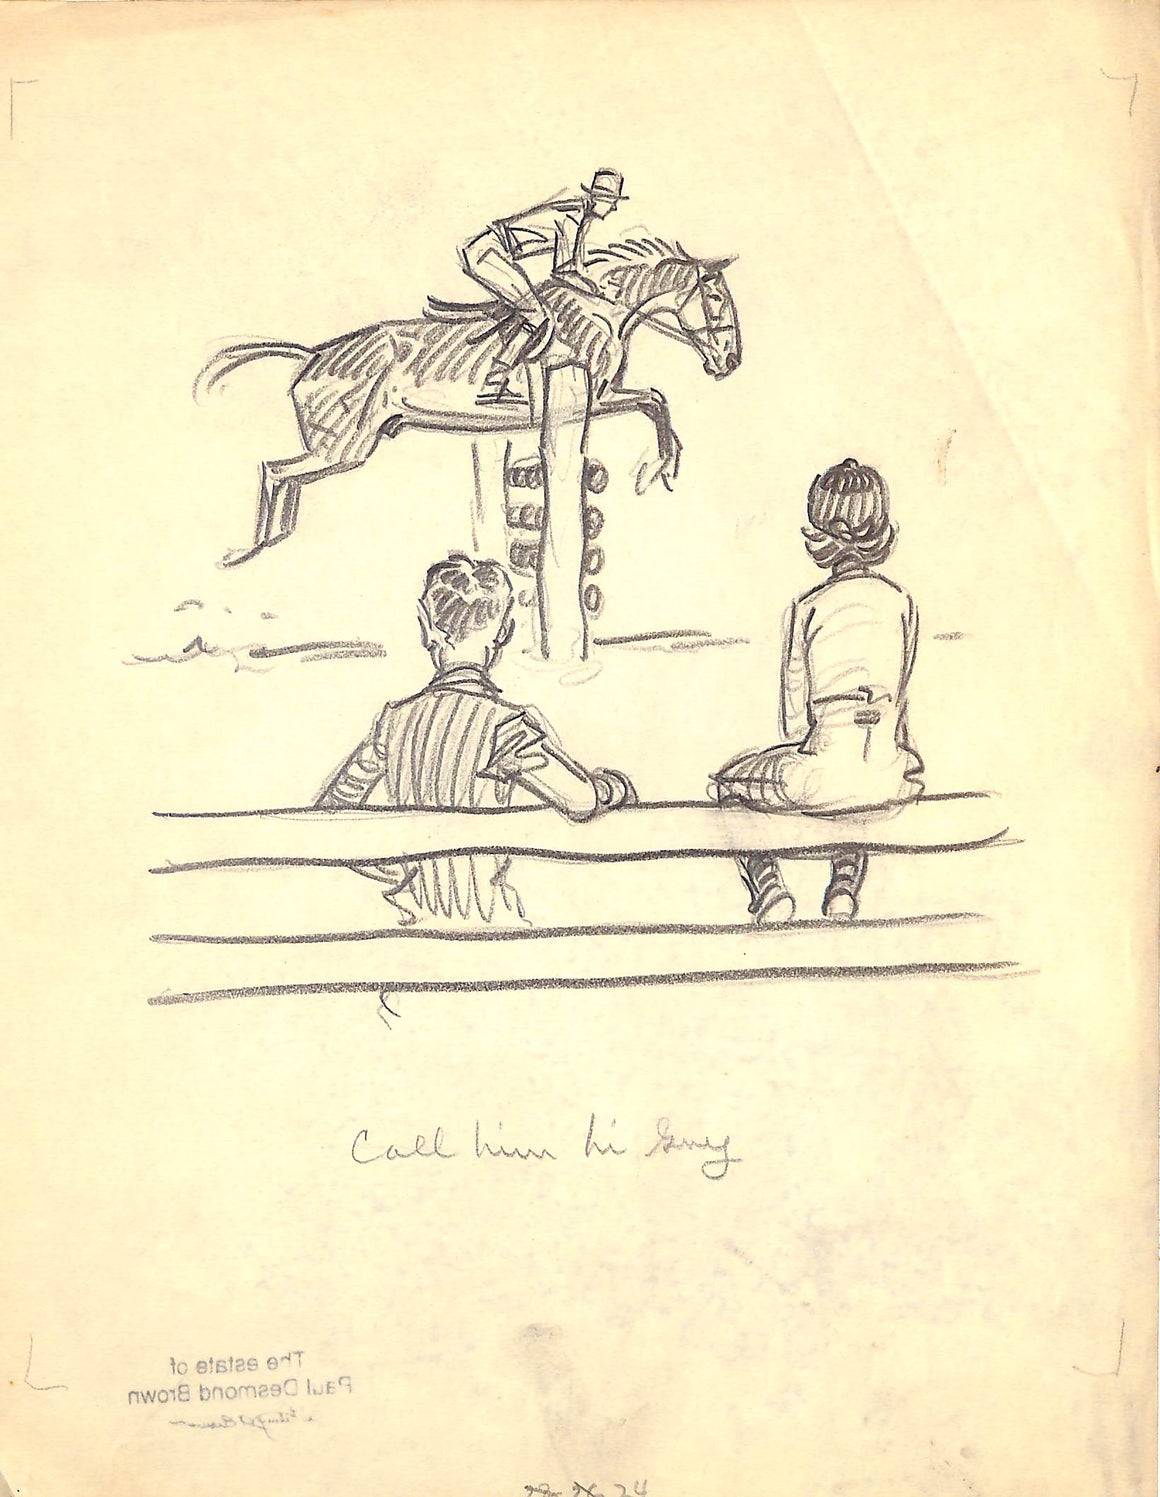 Original 1944 Pencil Drawing From Hi, Guy! The Cinderella Horse By Paul Brown 25